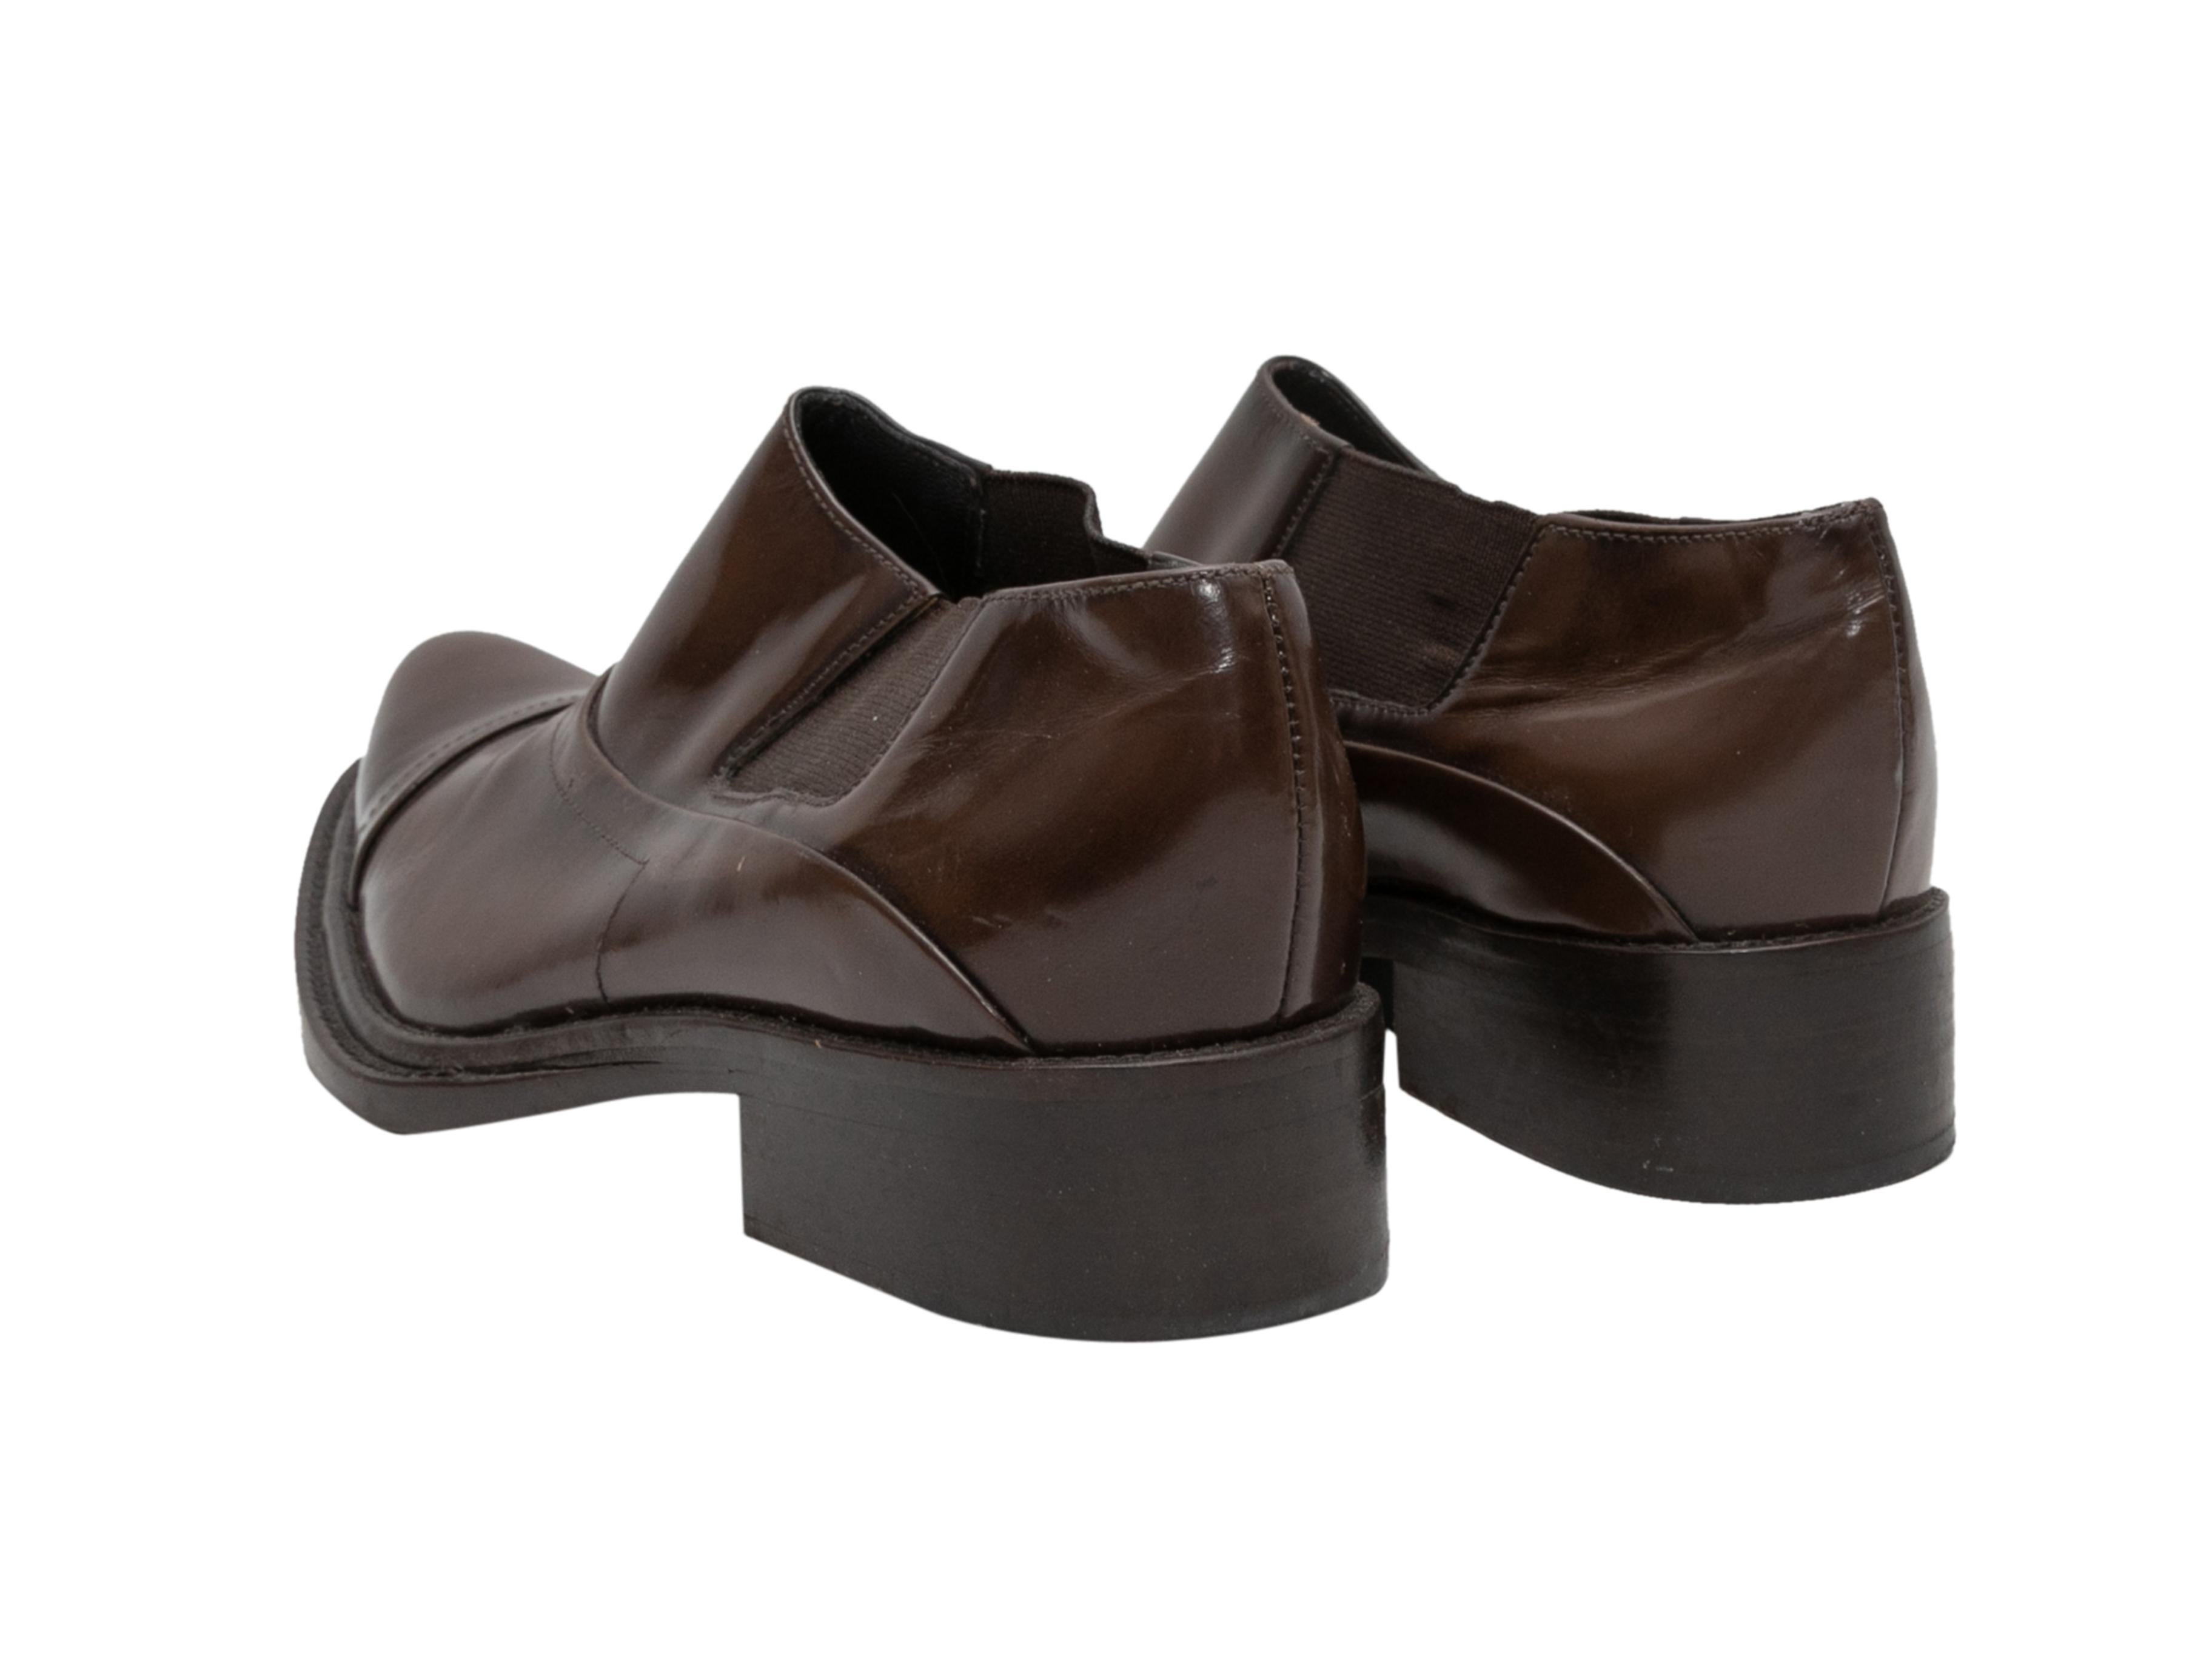 Brown Prada Leather Dress Shoes Size 37.5 For Sale 1